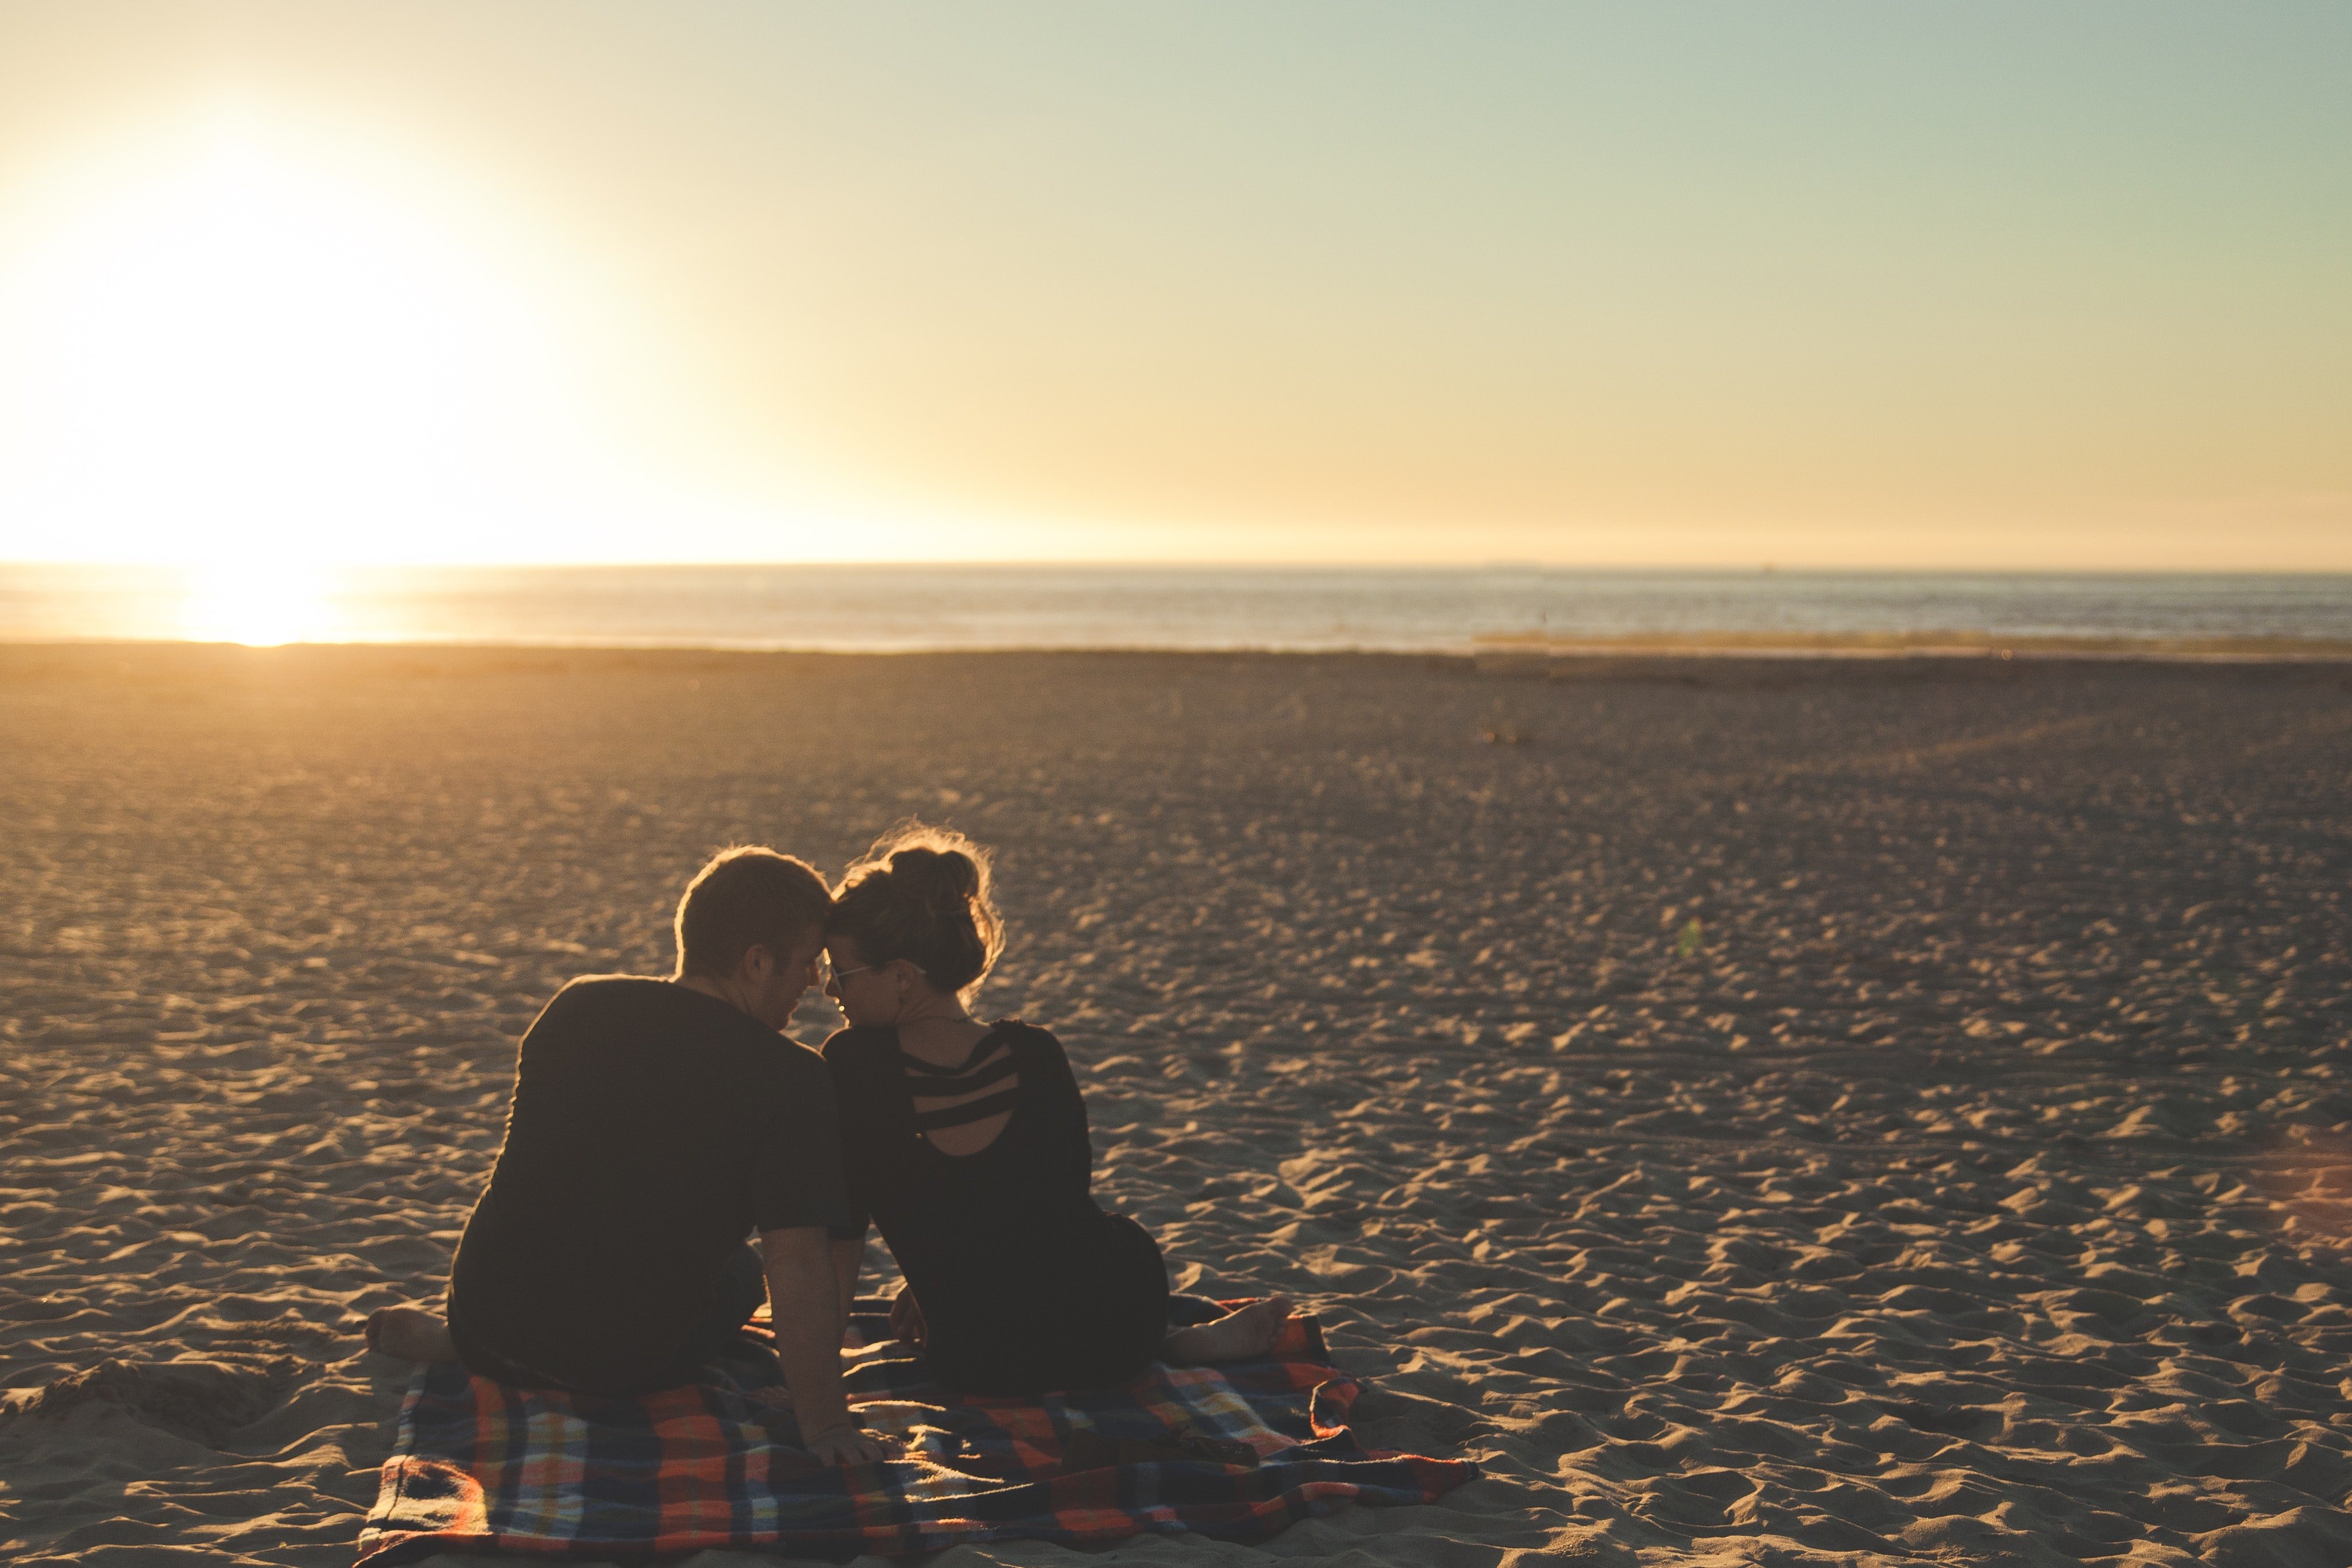 Our first date (if we don't count the techno club) took place on a beach an hour drive from the city | Source: Pexels